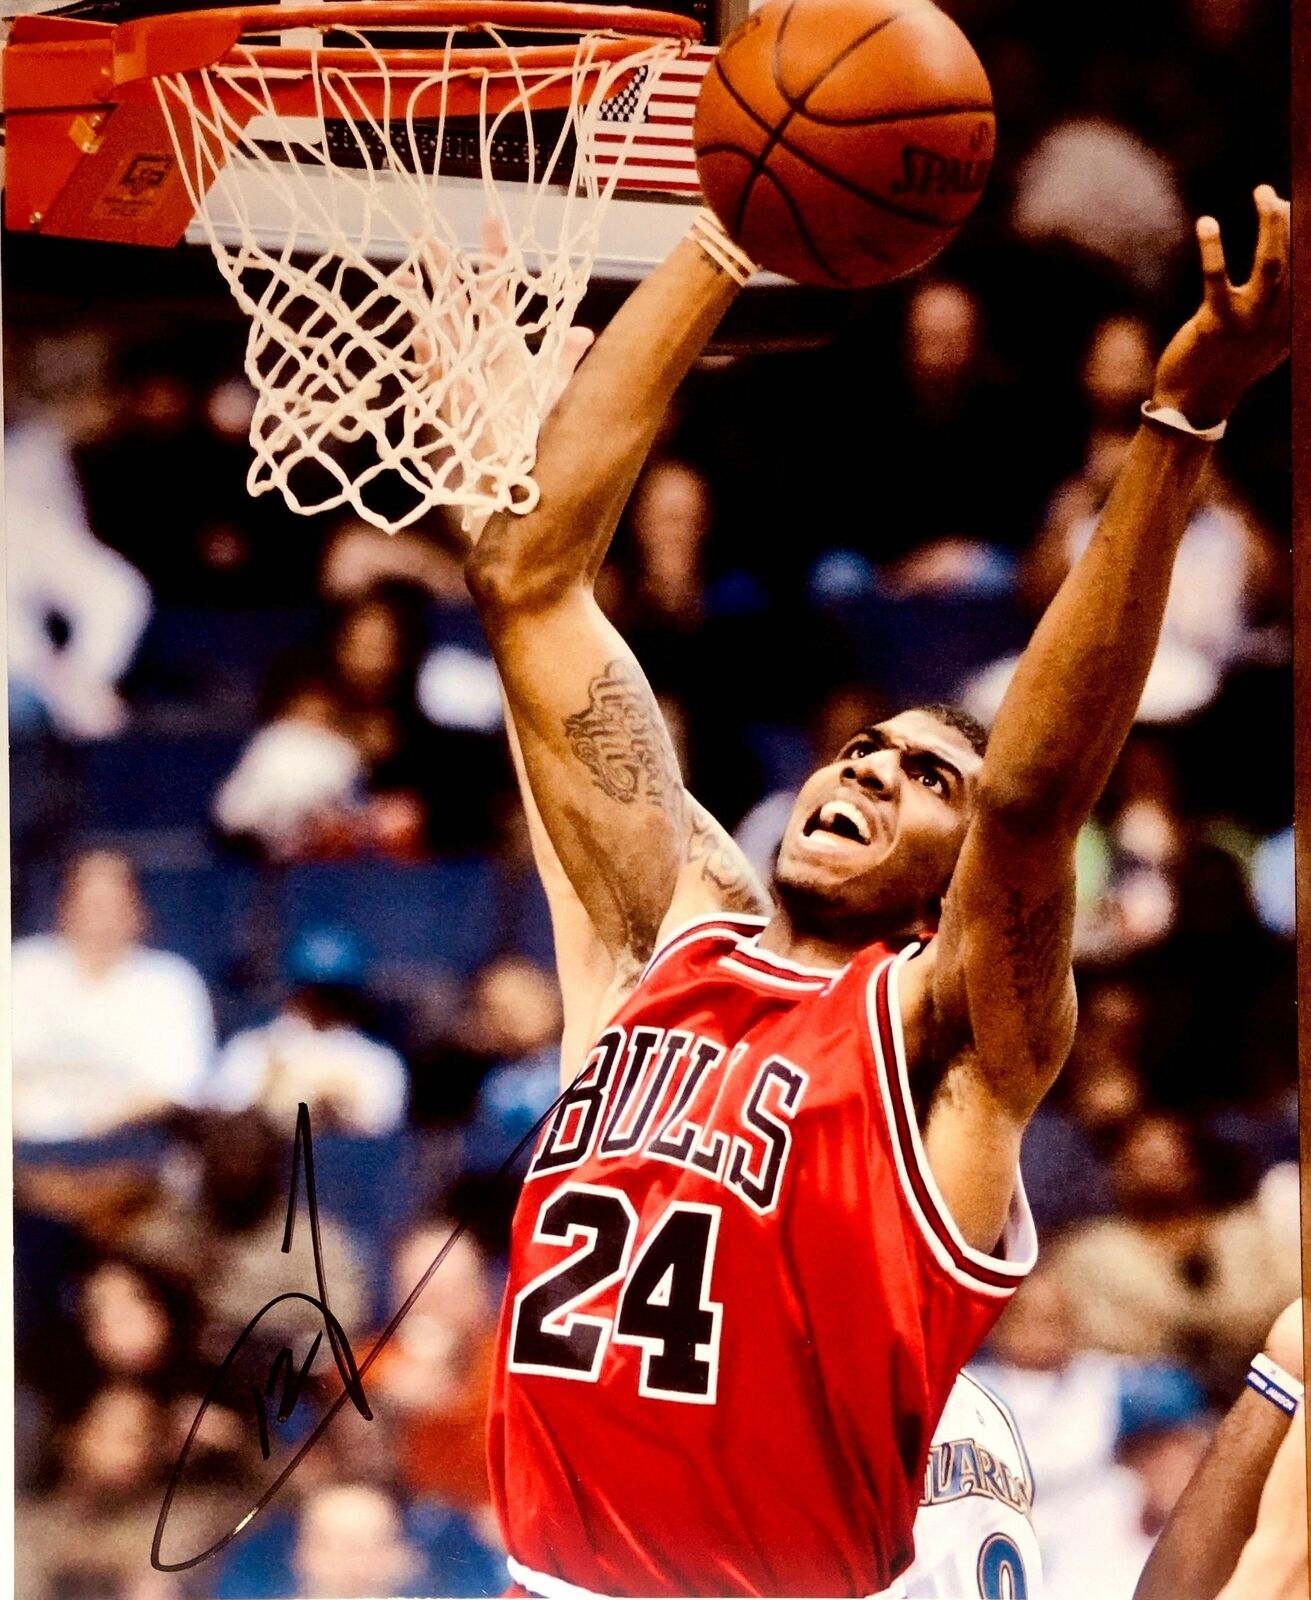 Tyrus Thomas Signed Las Vegas Mall 8x10 Photo Chicago LSU Tigers Fixed price for sale Autograp Bulls